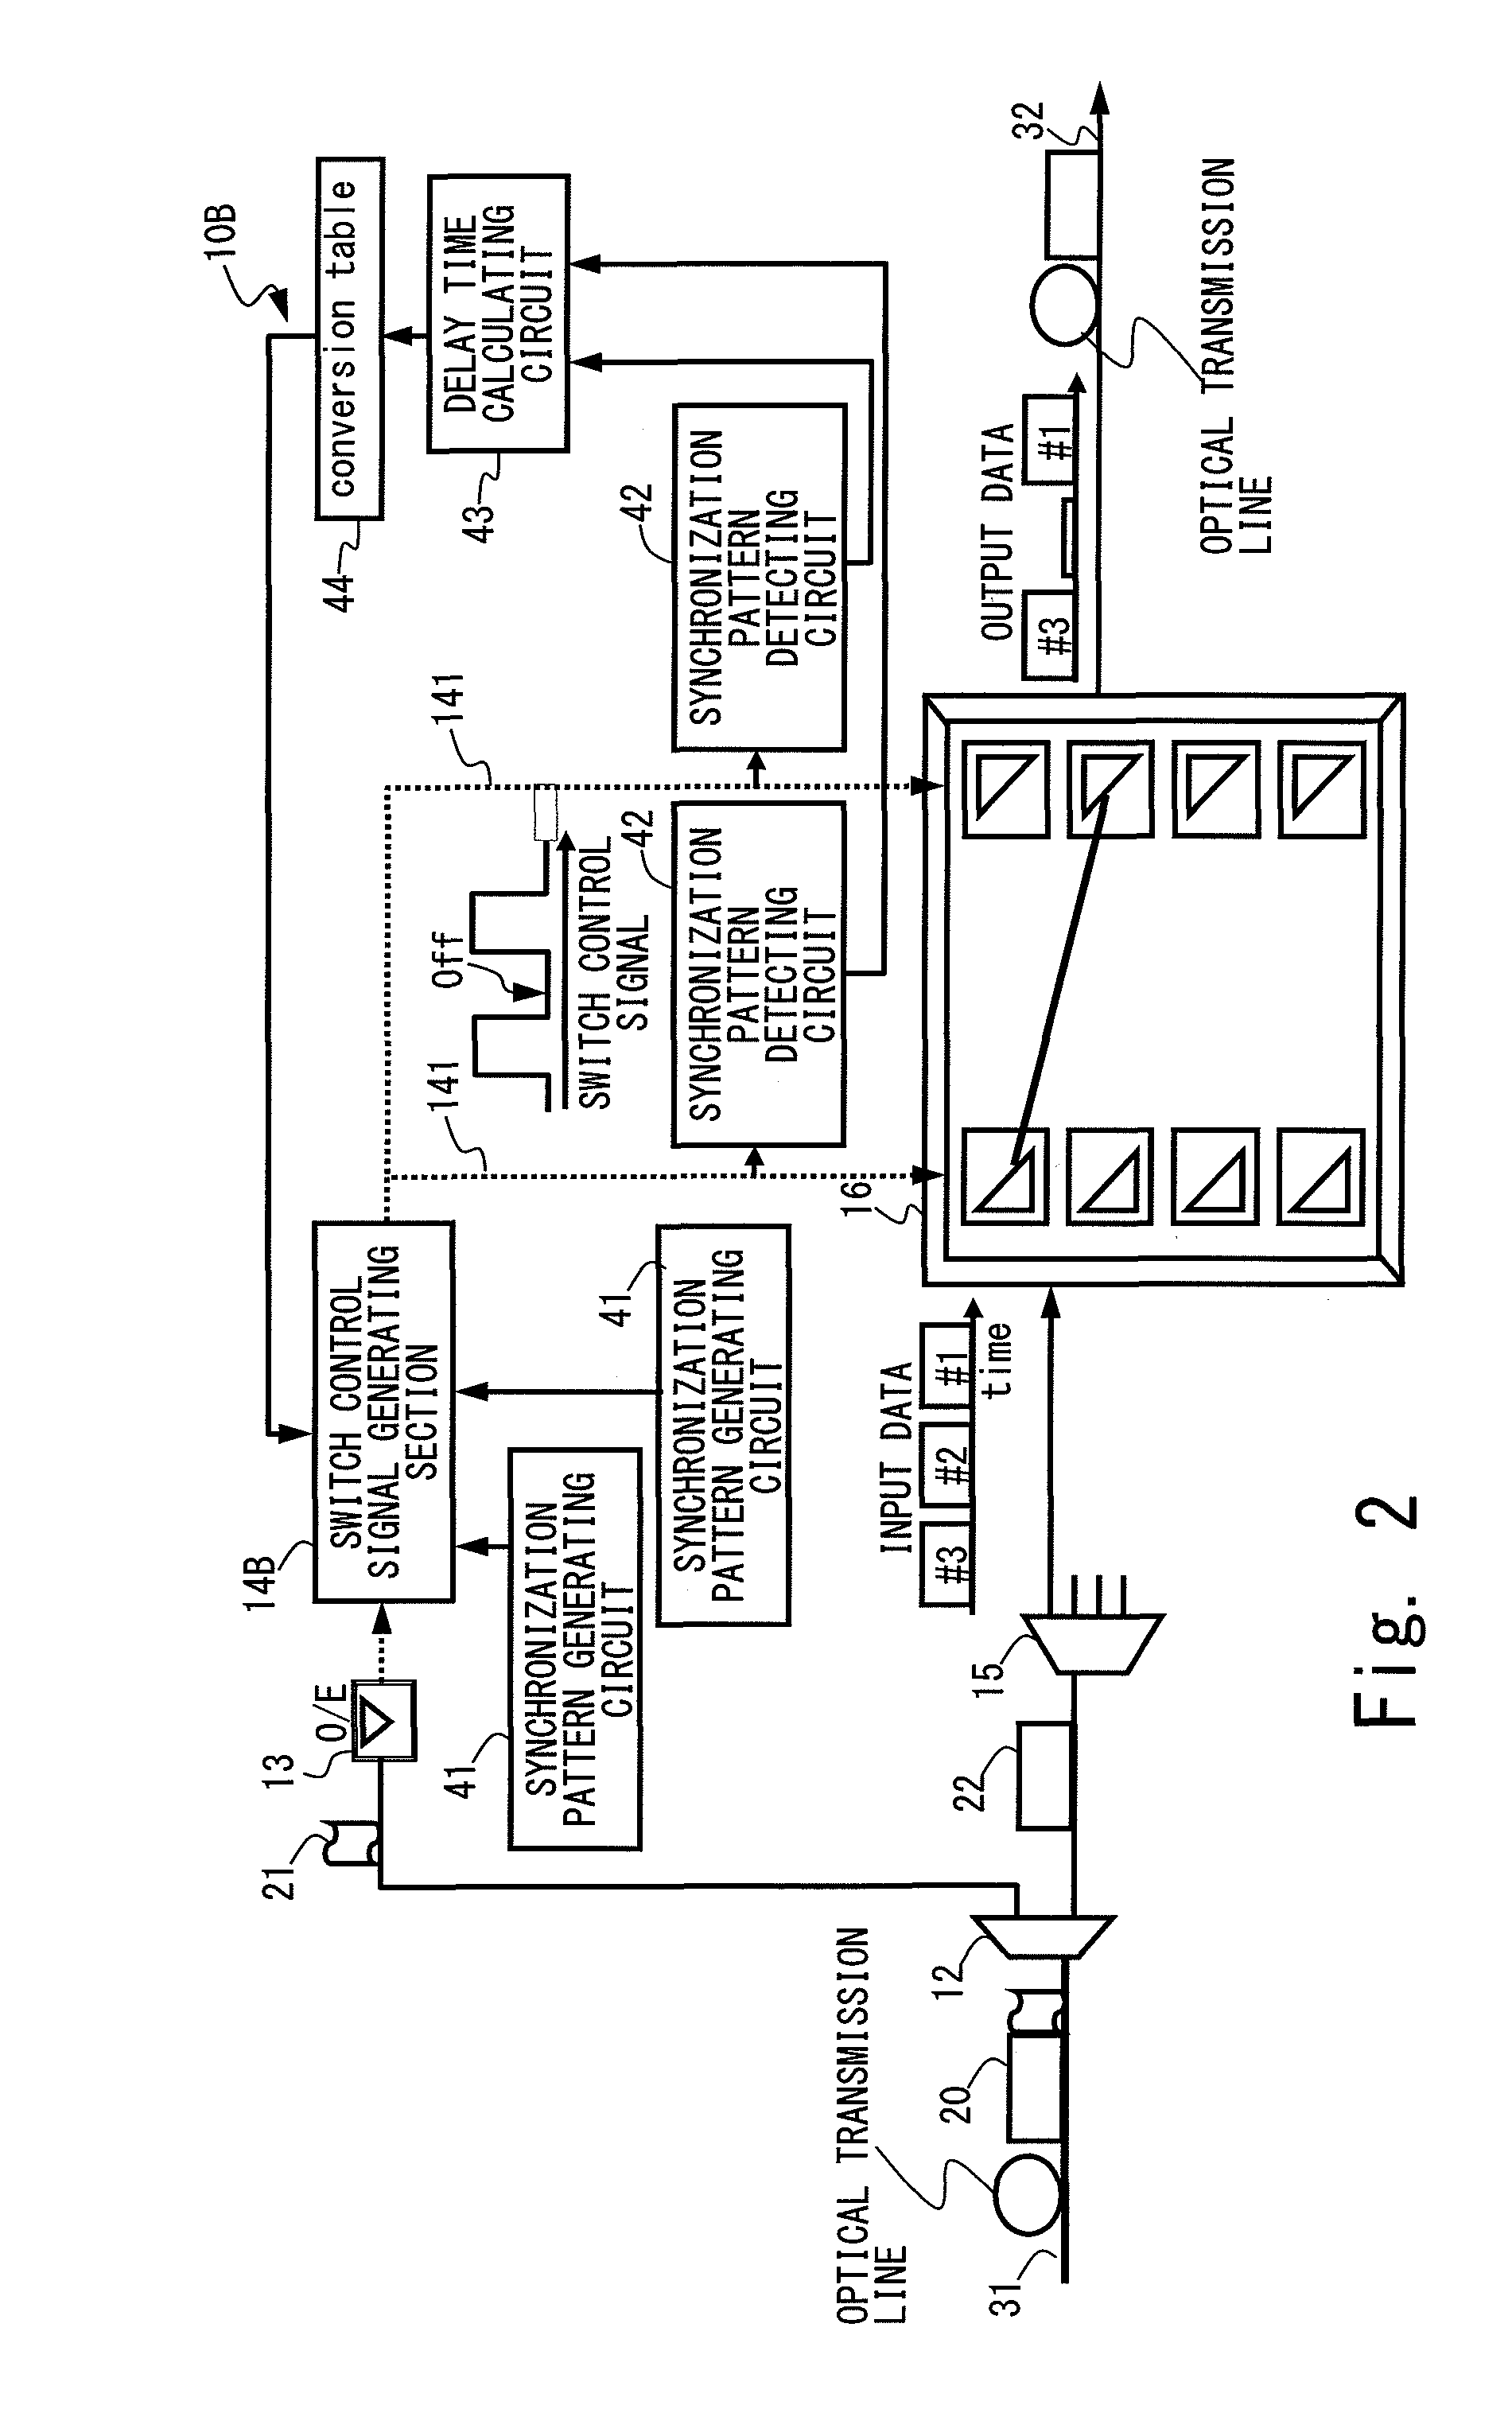 Optical packet switching apparatus and method therefor